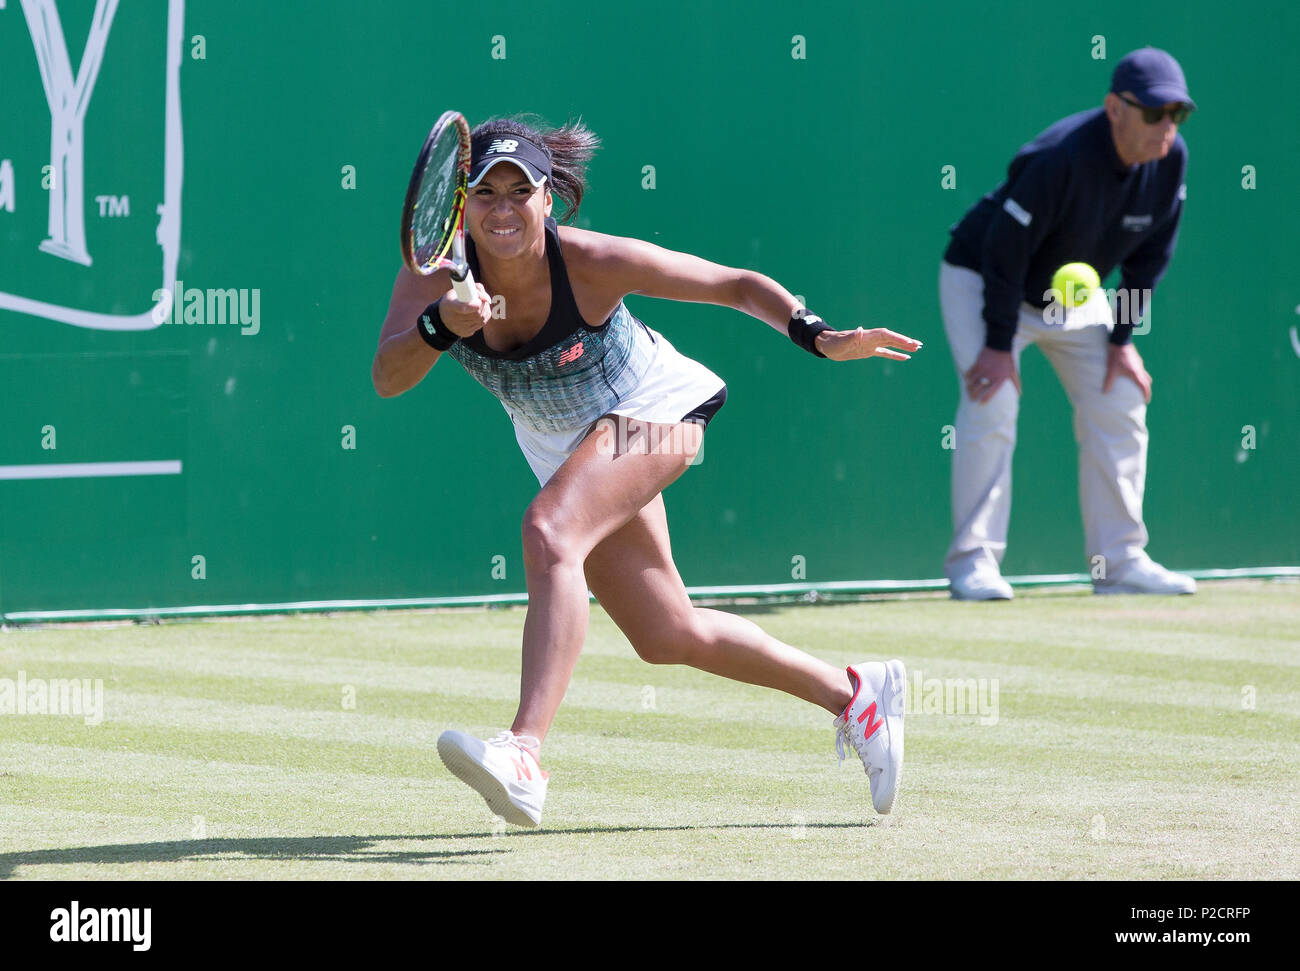 Heather Watson Tennis Player in action Stock Photo